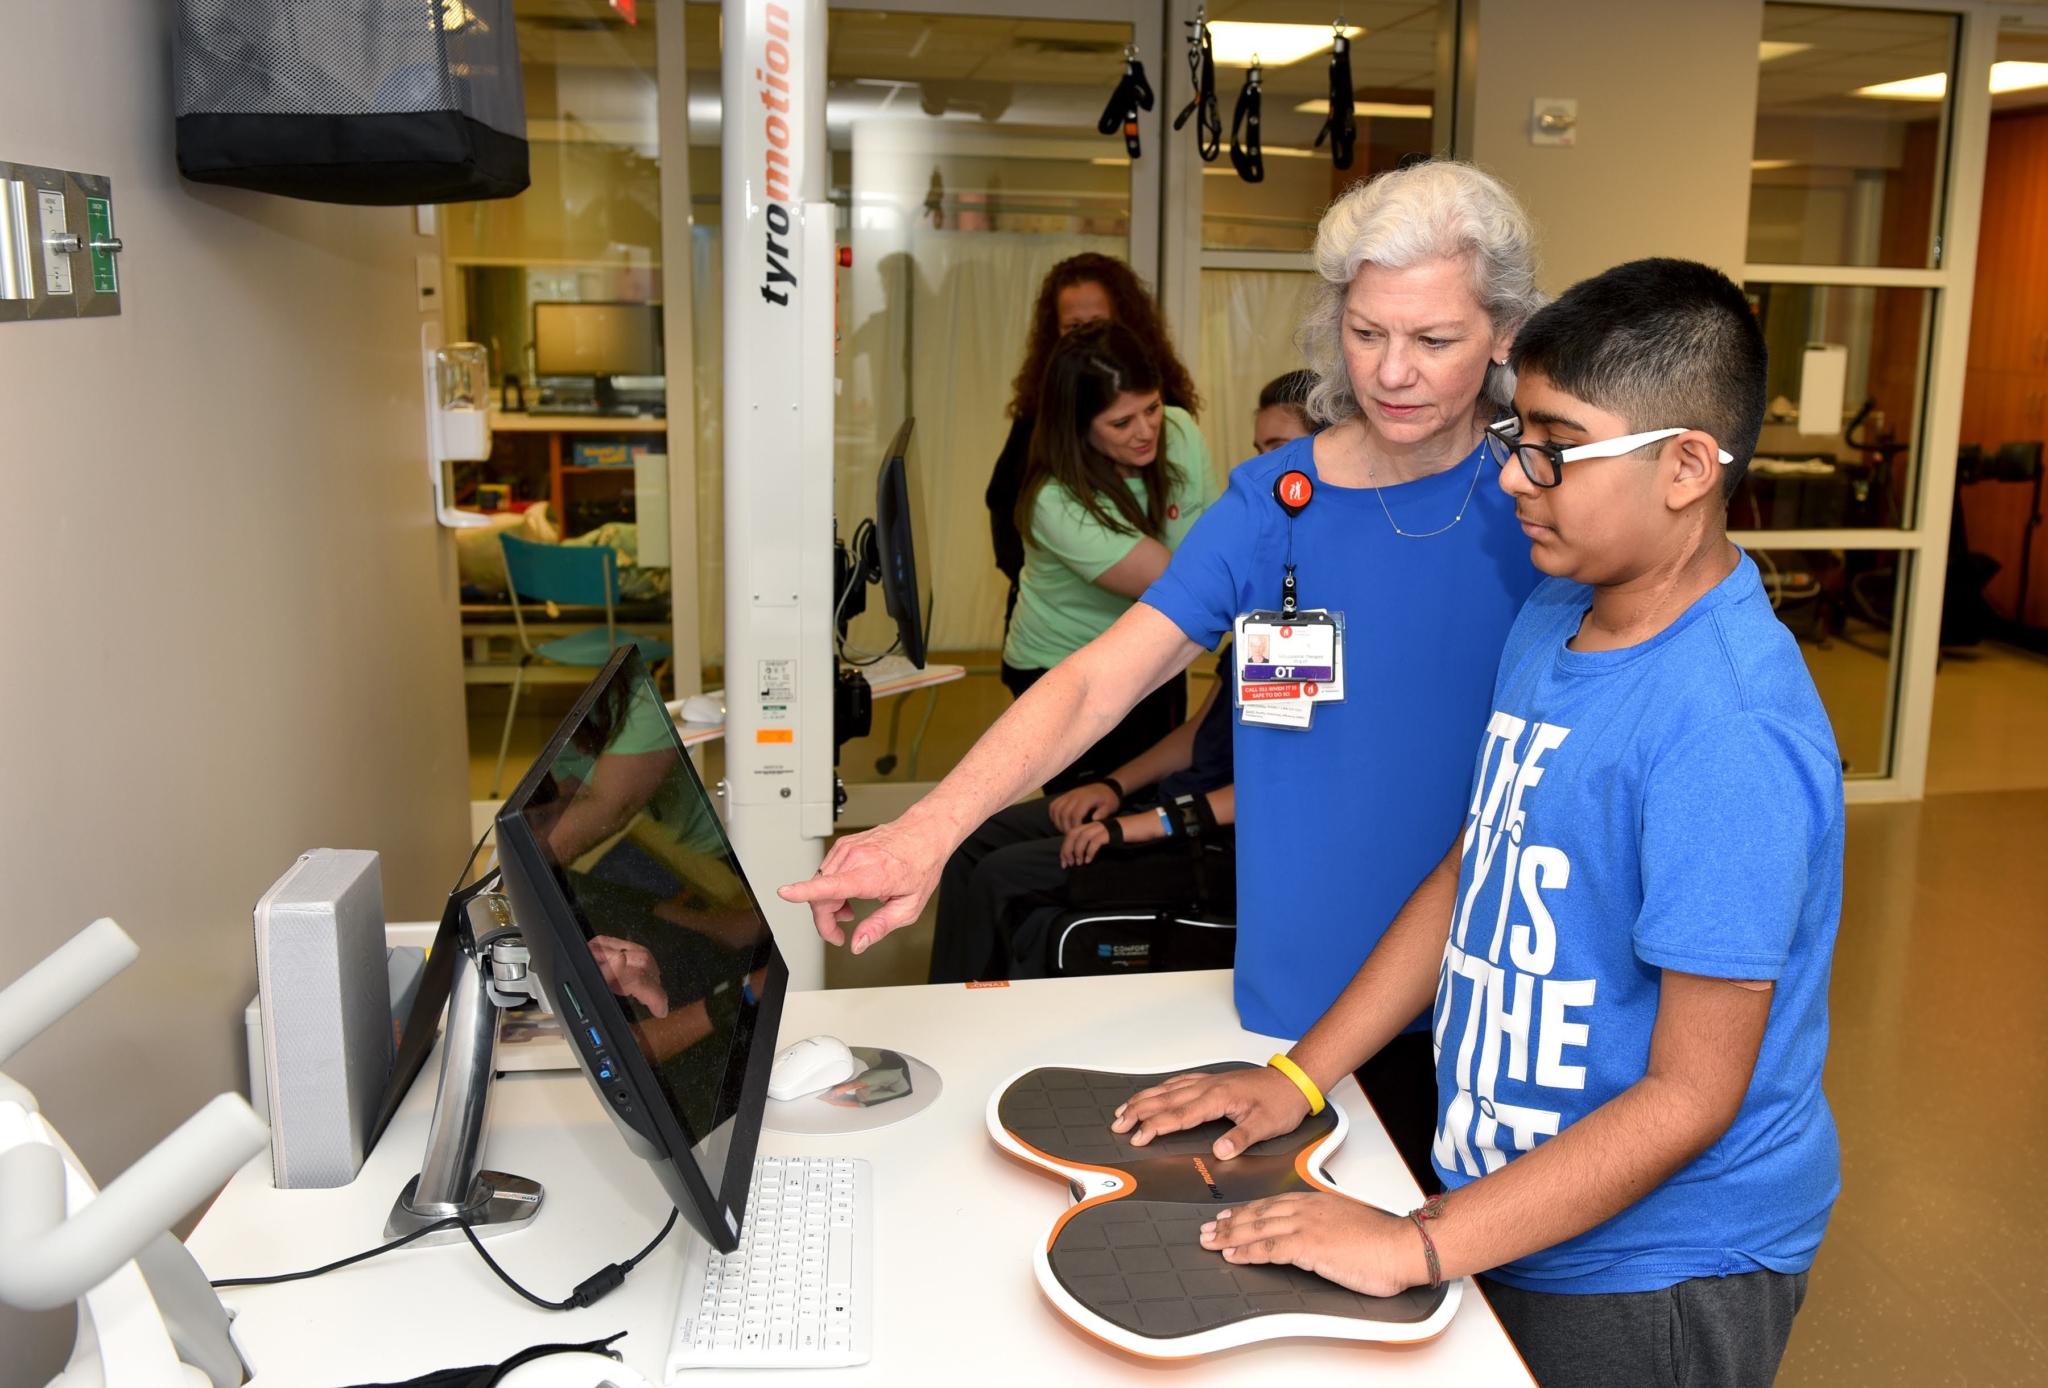 BhamNow RAMP 2 This robotics program uses innovative tech to help children with physical impairments—see positive results